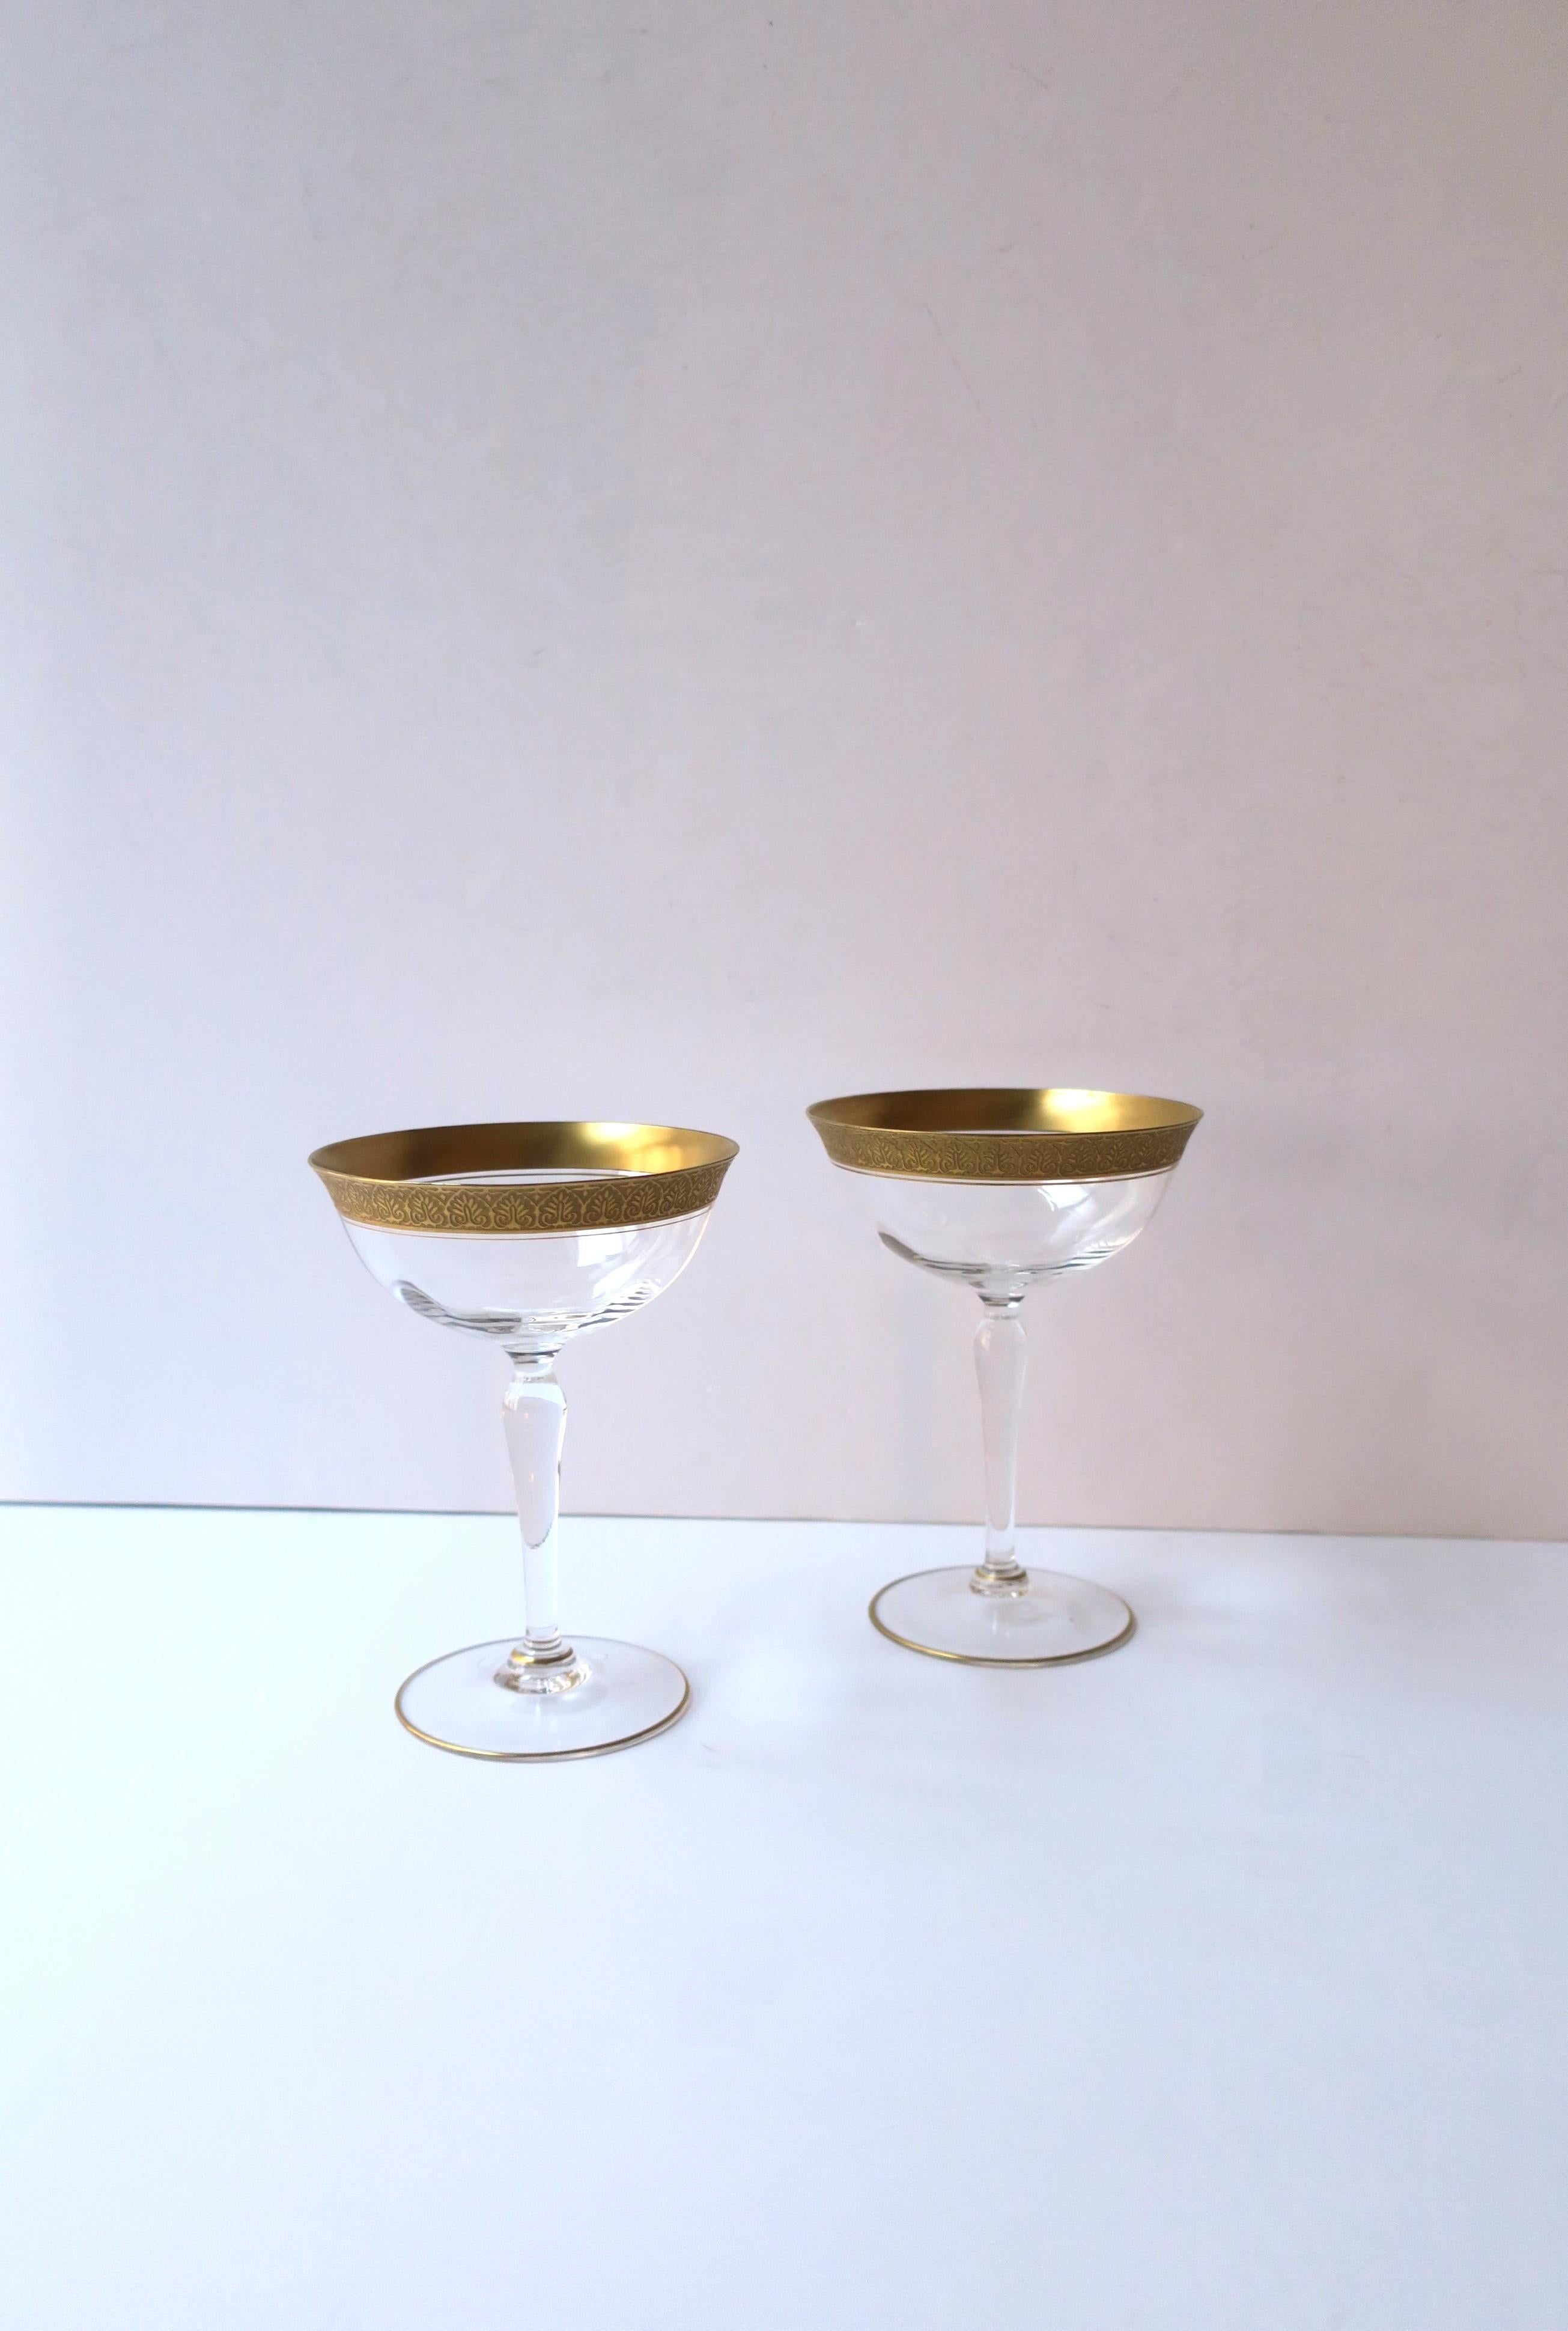 Champagne Coupes Cocktail Glasses with Gold Rim, Pair In Good Condition For Sale In New York, NY